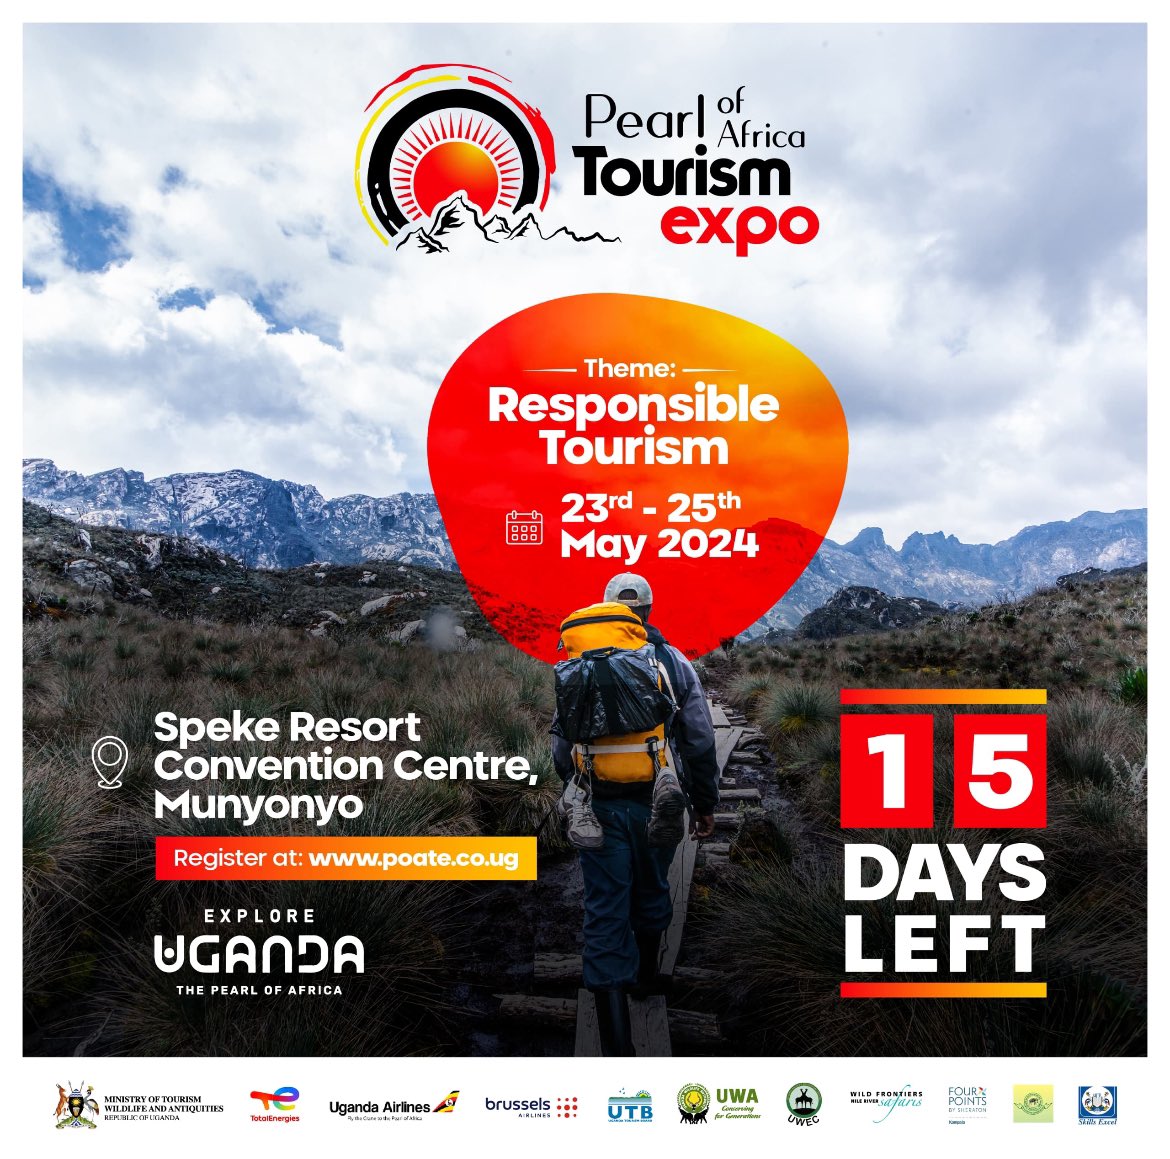 Just 15 days to Uganda’s biggest Tourism Expo #POATE2024 Are you ready for opportunities to sell and network?